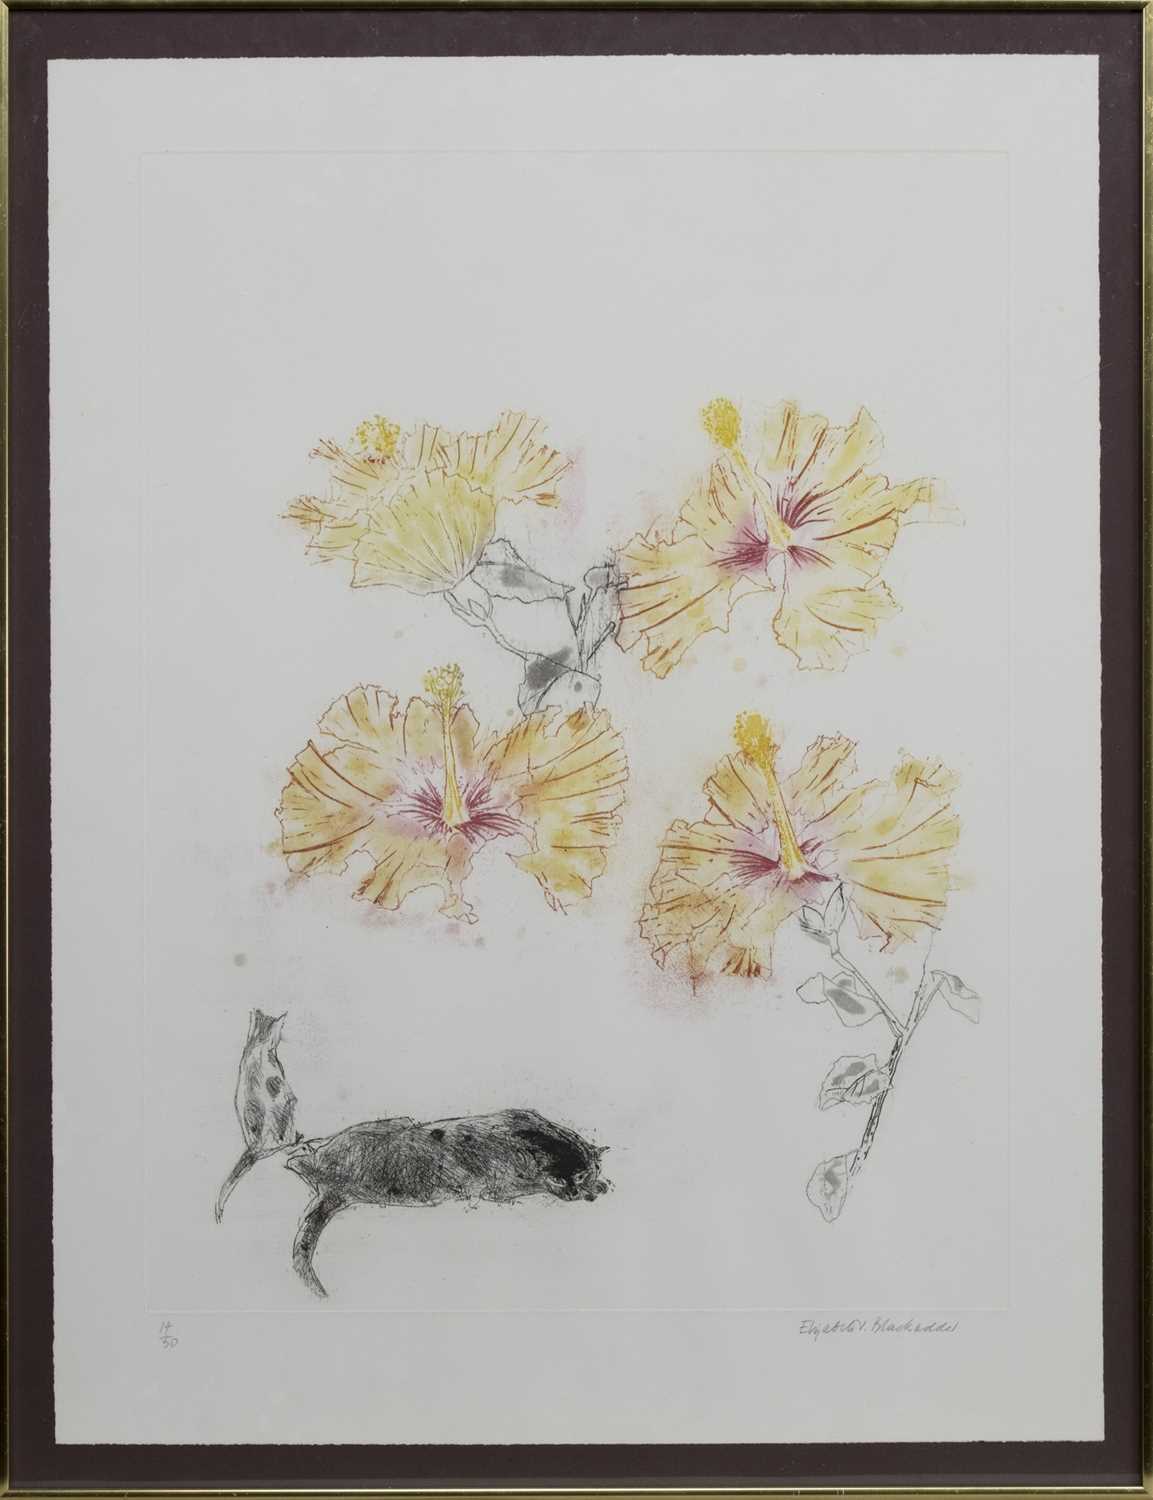 Lot 68 - HIBISCUS AND CATS, AN ETCHING BY ELIZABETH BLACKADDER